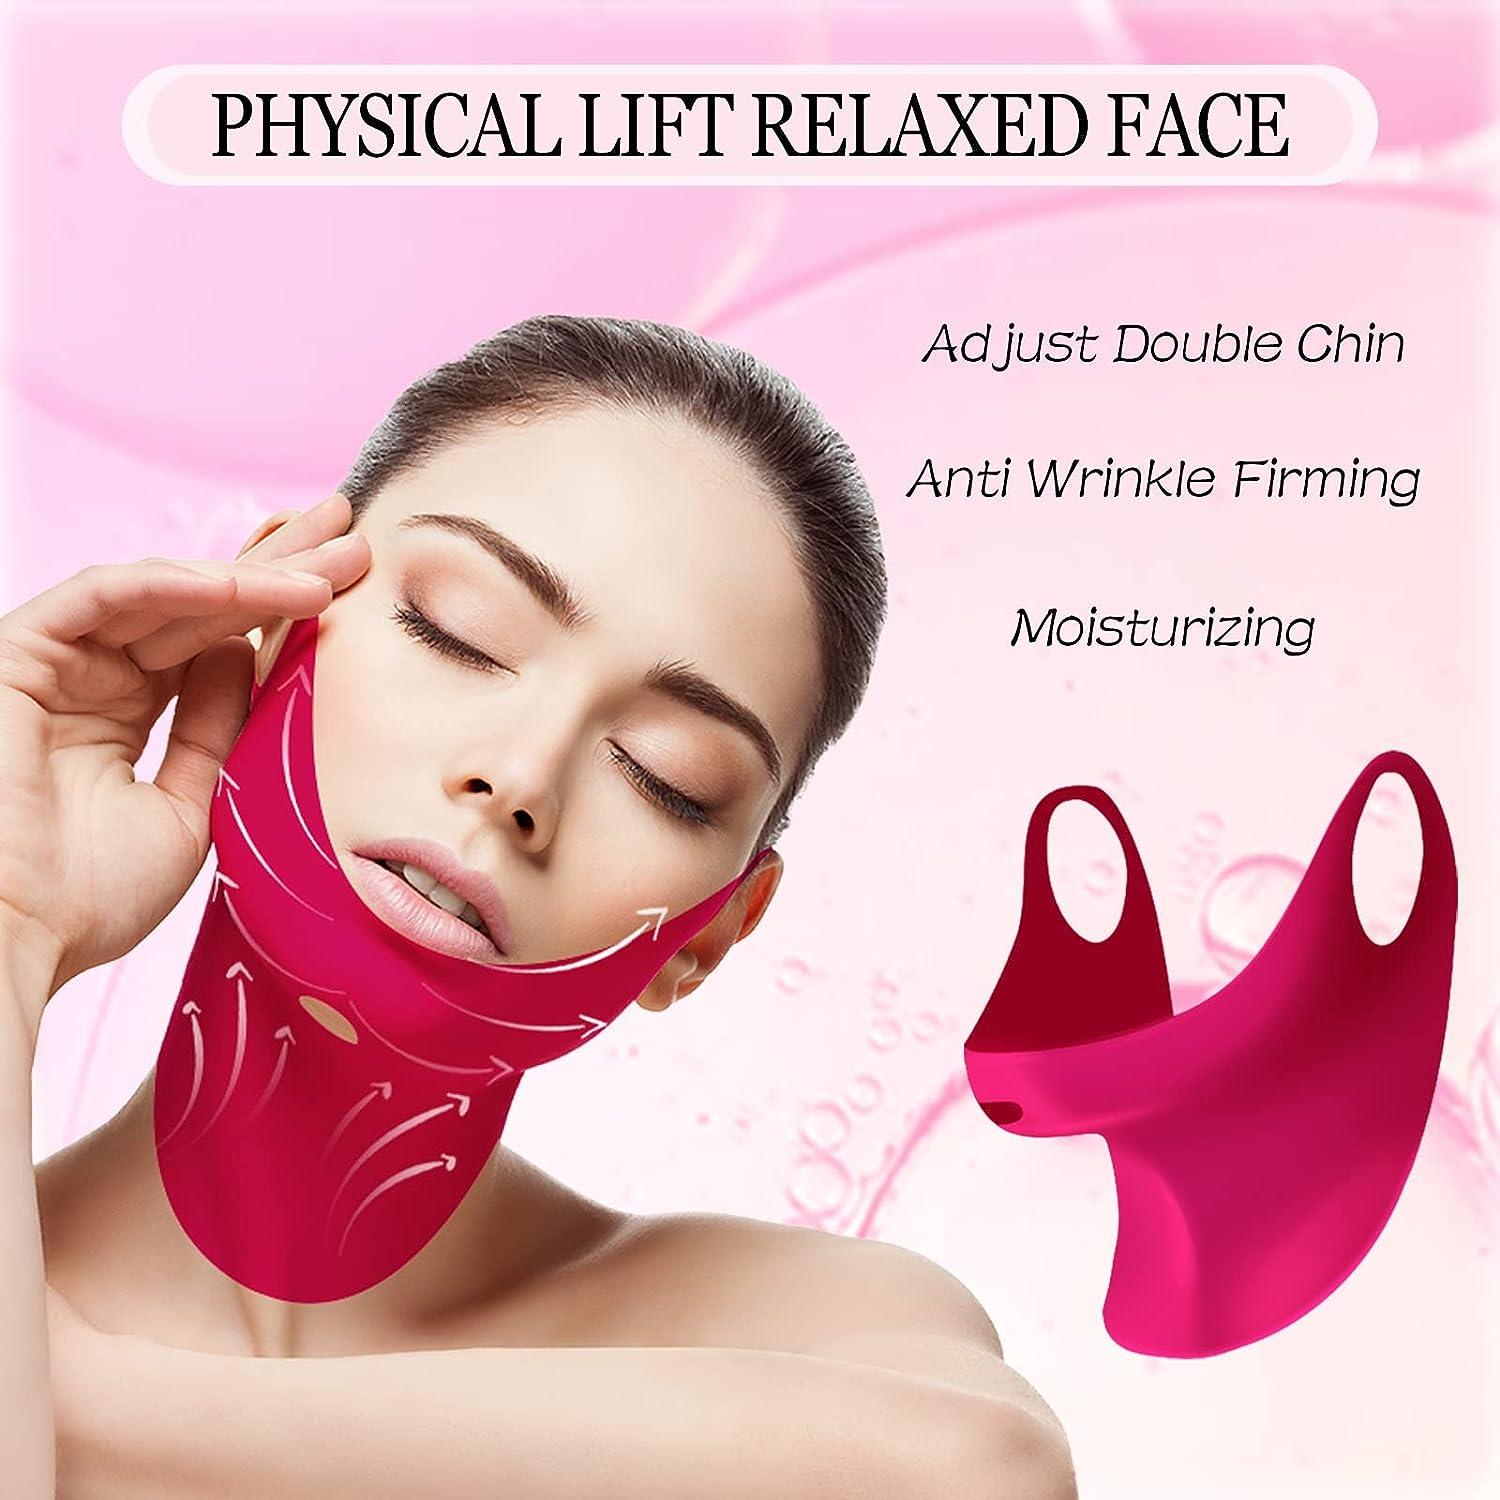 APPTI 5 Pcs Rosa Rugosa V-Line Lifting Bandage Mask Face Slimmer Face  Lifting Mask Chin Up Patch Chin Strap for Double Chin for Women Double Chin  Reducer V-Line Shaping Chin Mask Cheek